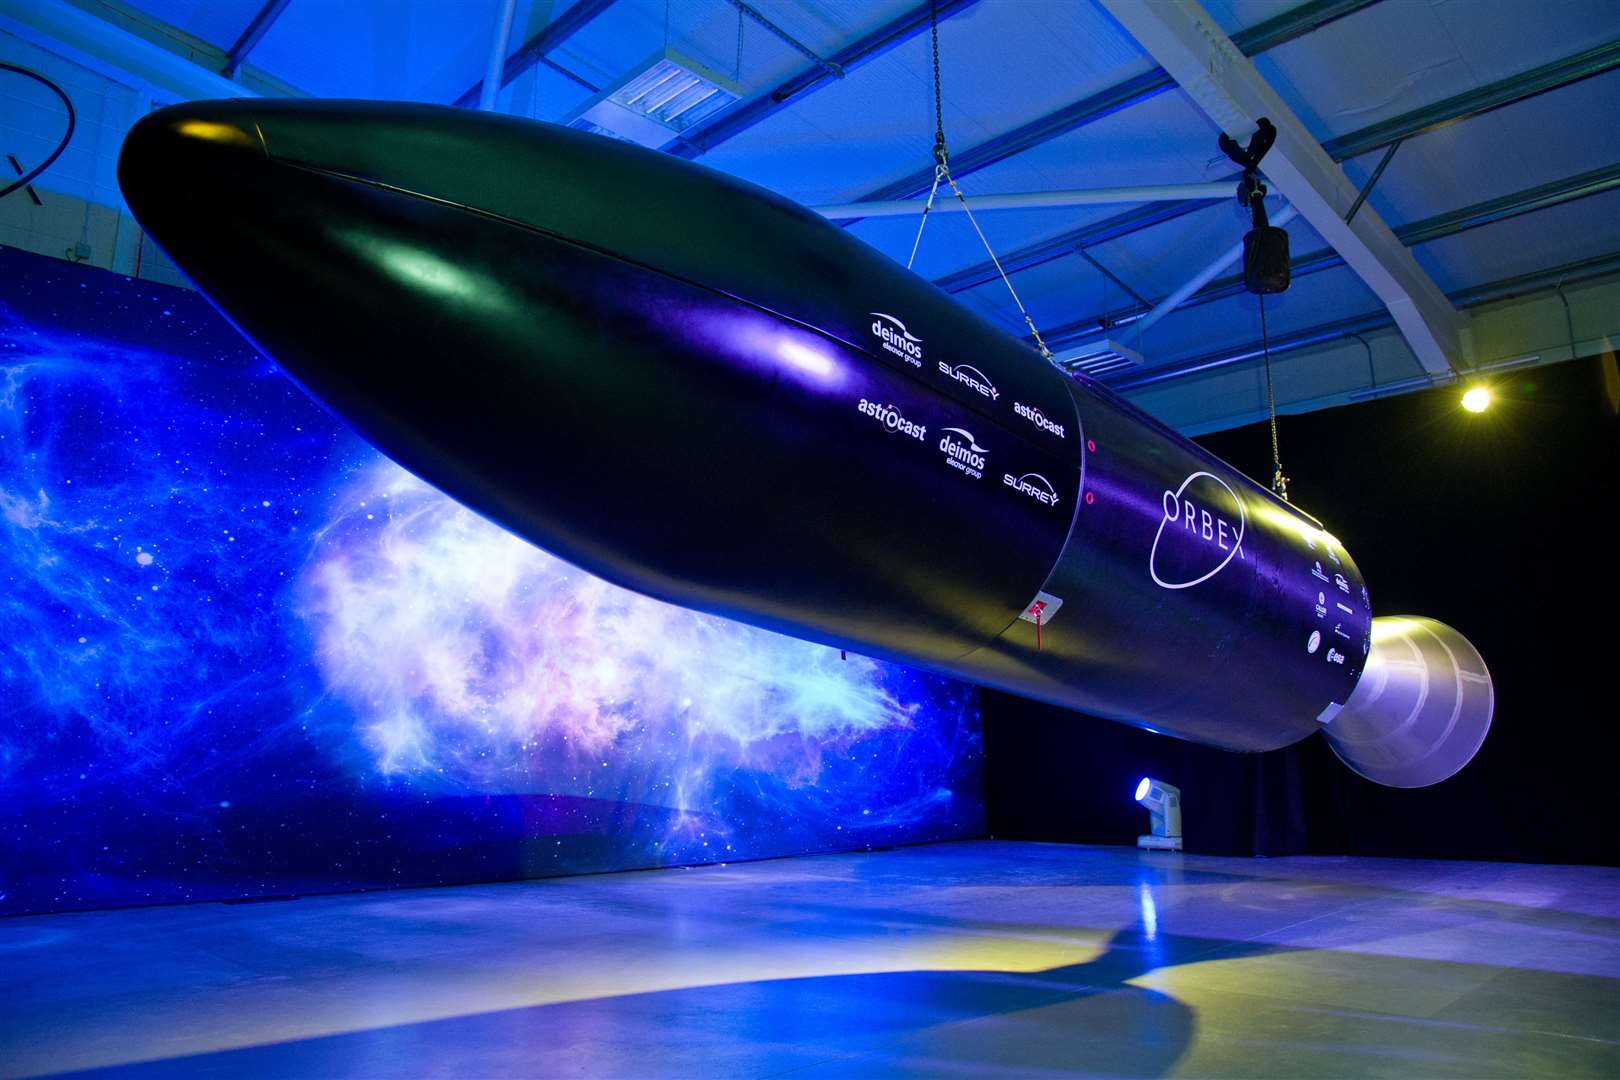 Orbex in Forres is one of two Scottish companies that design and manufacture launch vehicles. Picture: Daniel Forsyth